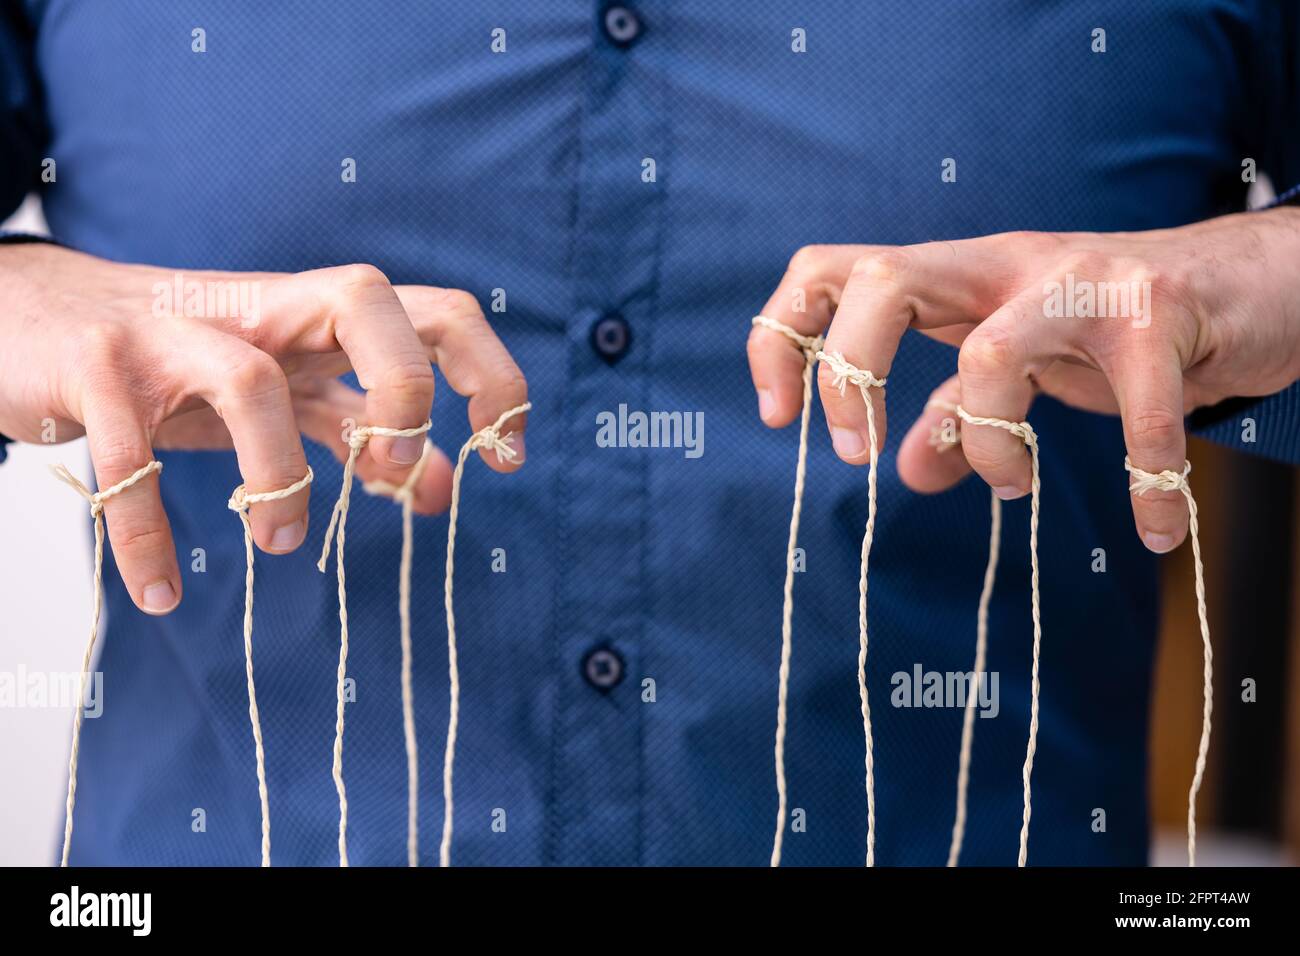 Manipulating Marionette Puppet Strings By Hand. Business Power Stock Photo